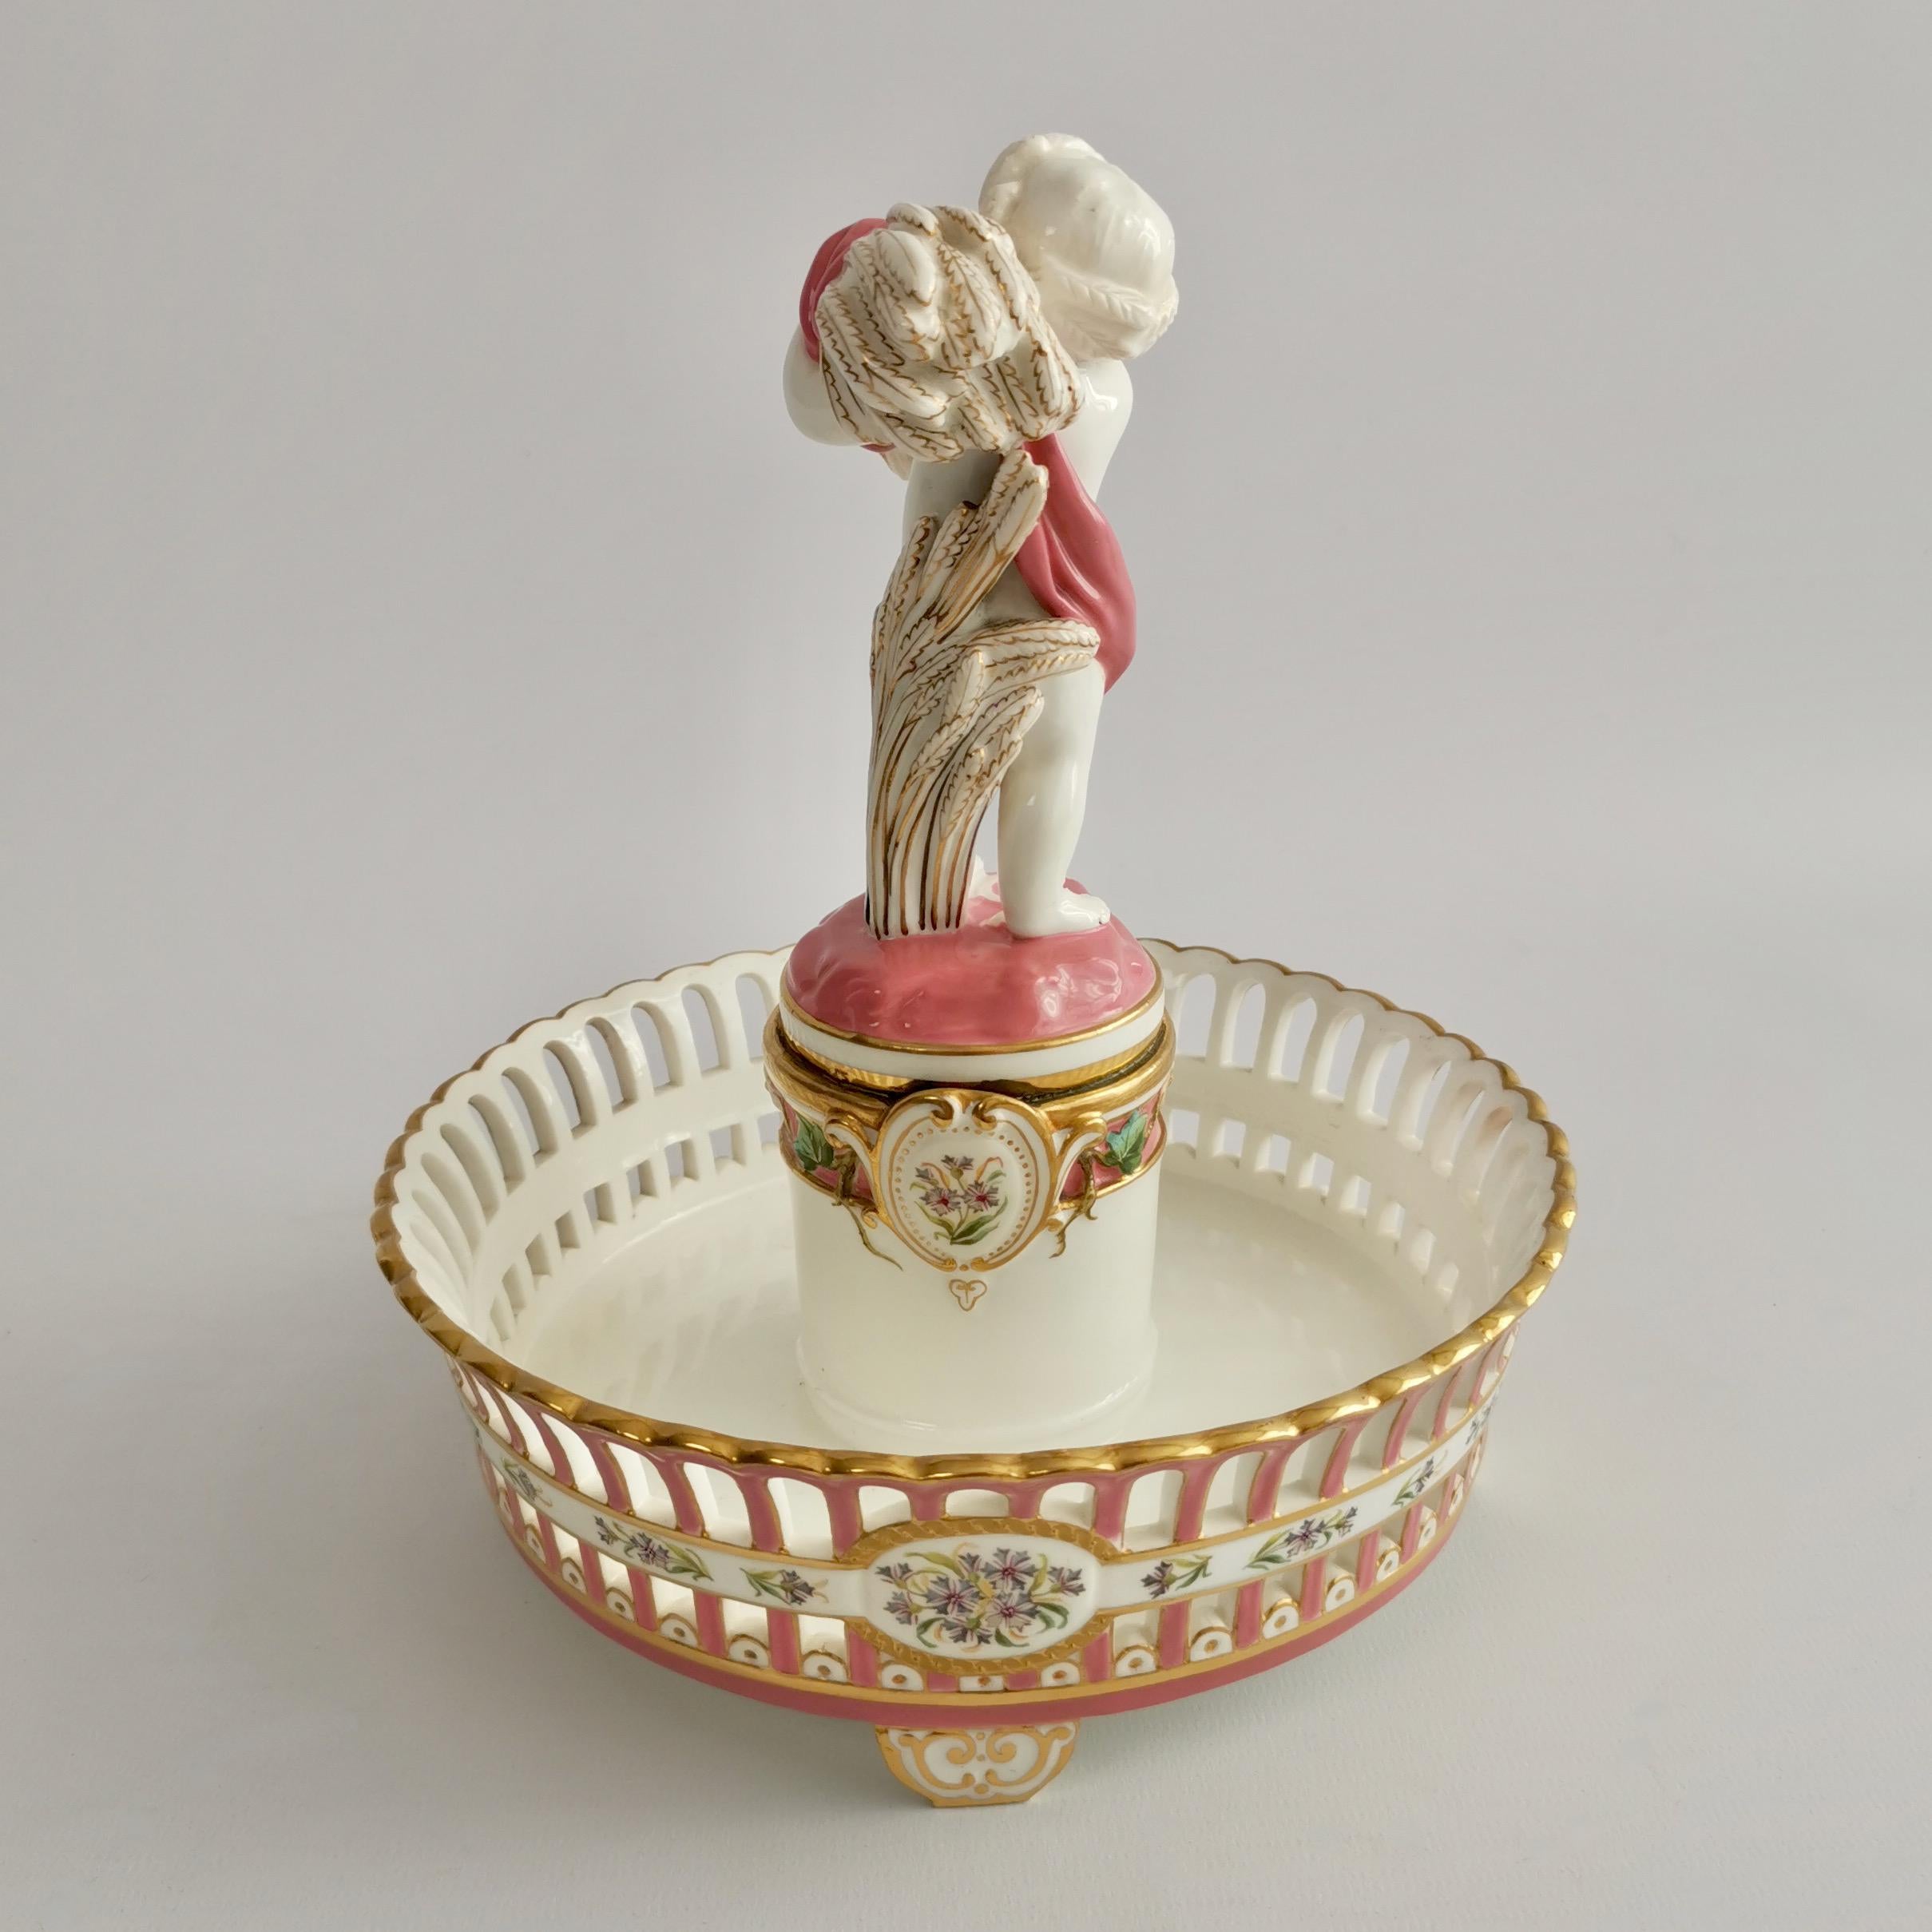 Victorian Minton Porcelain Tazza Dish, White and Pink with Cherub, 1891